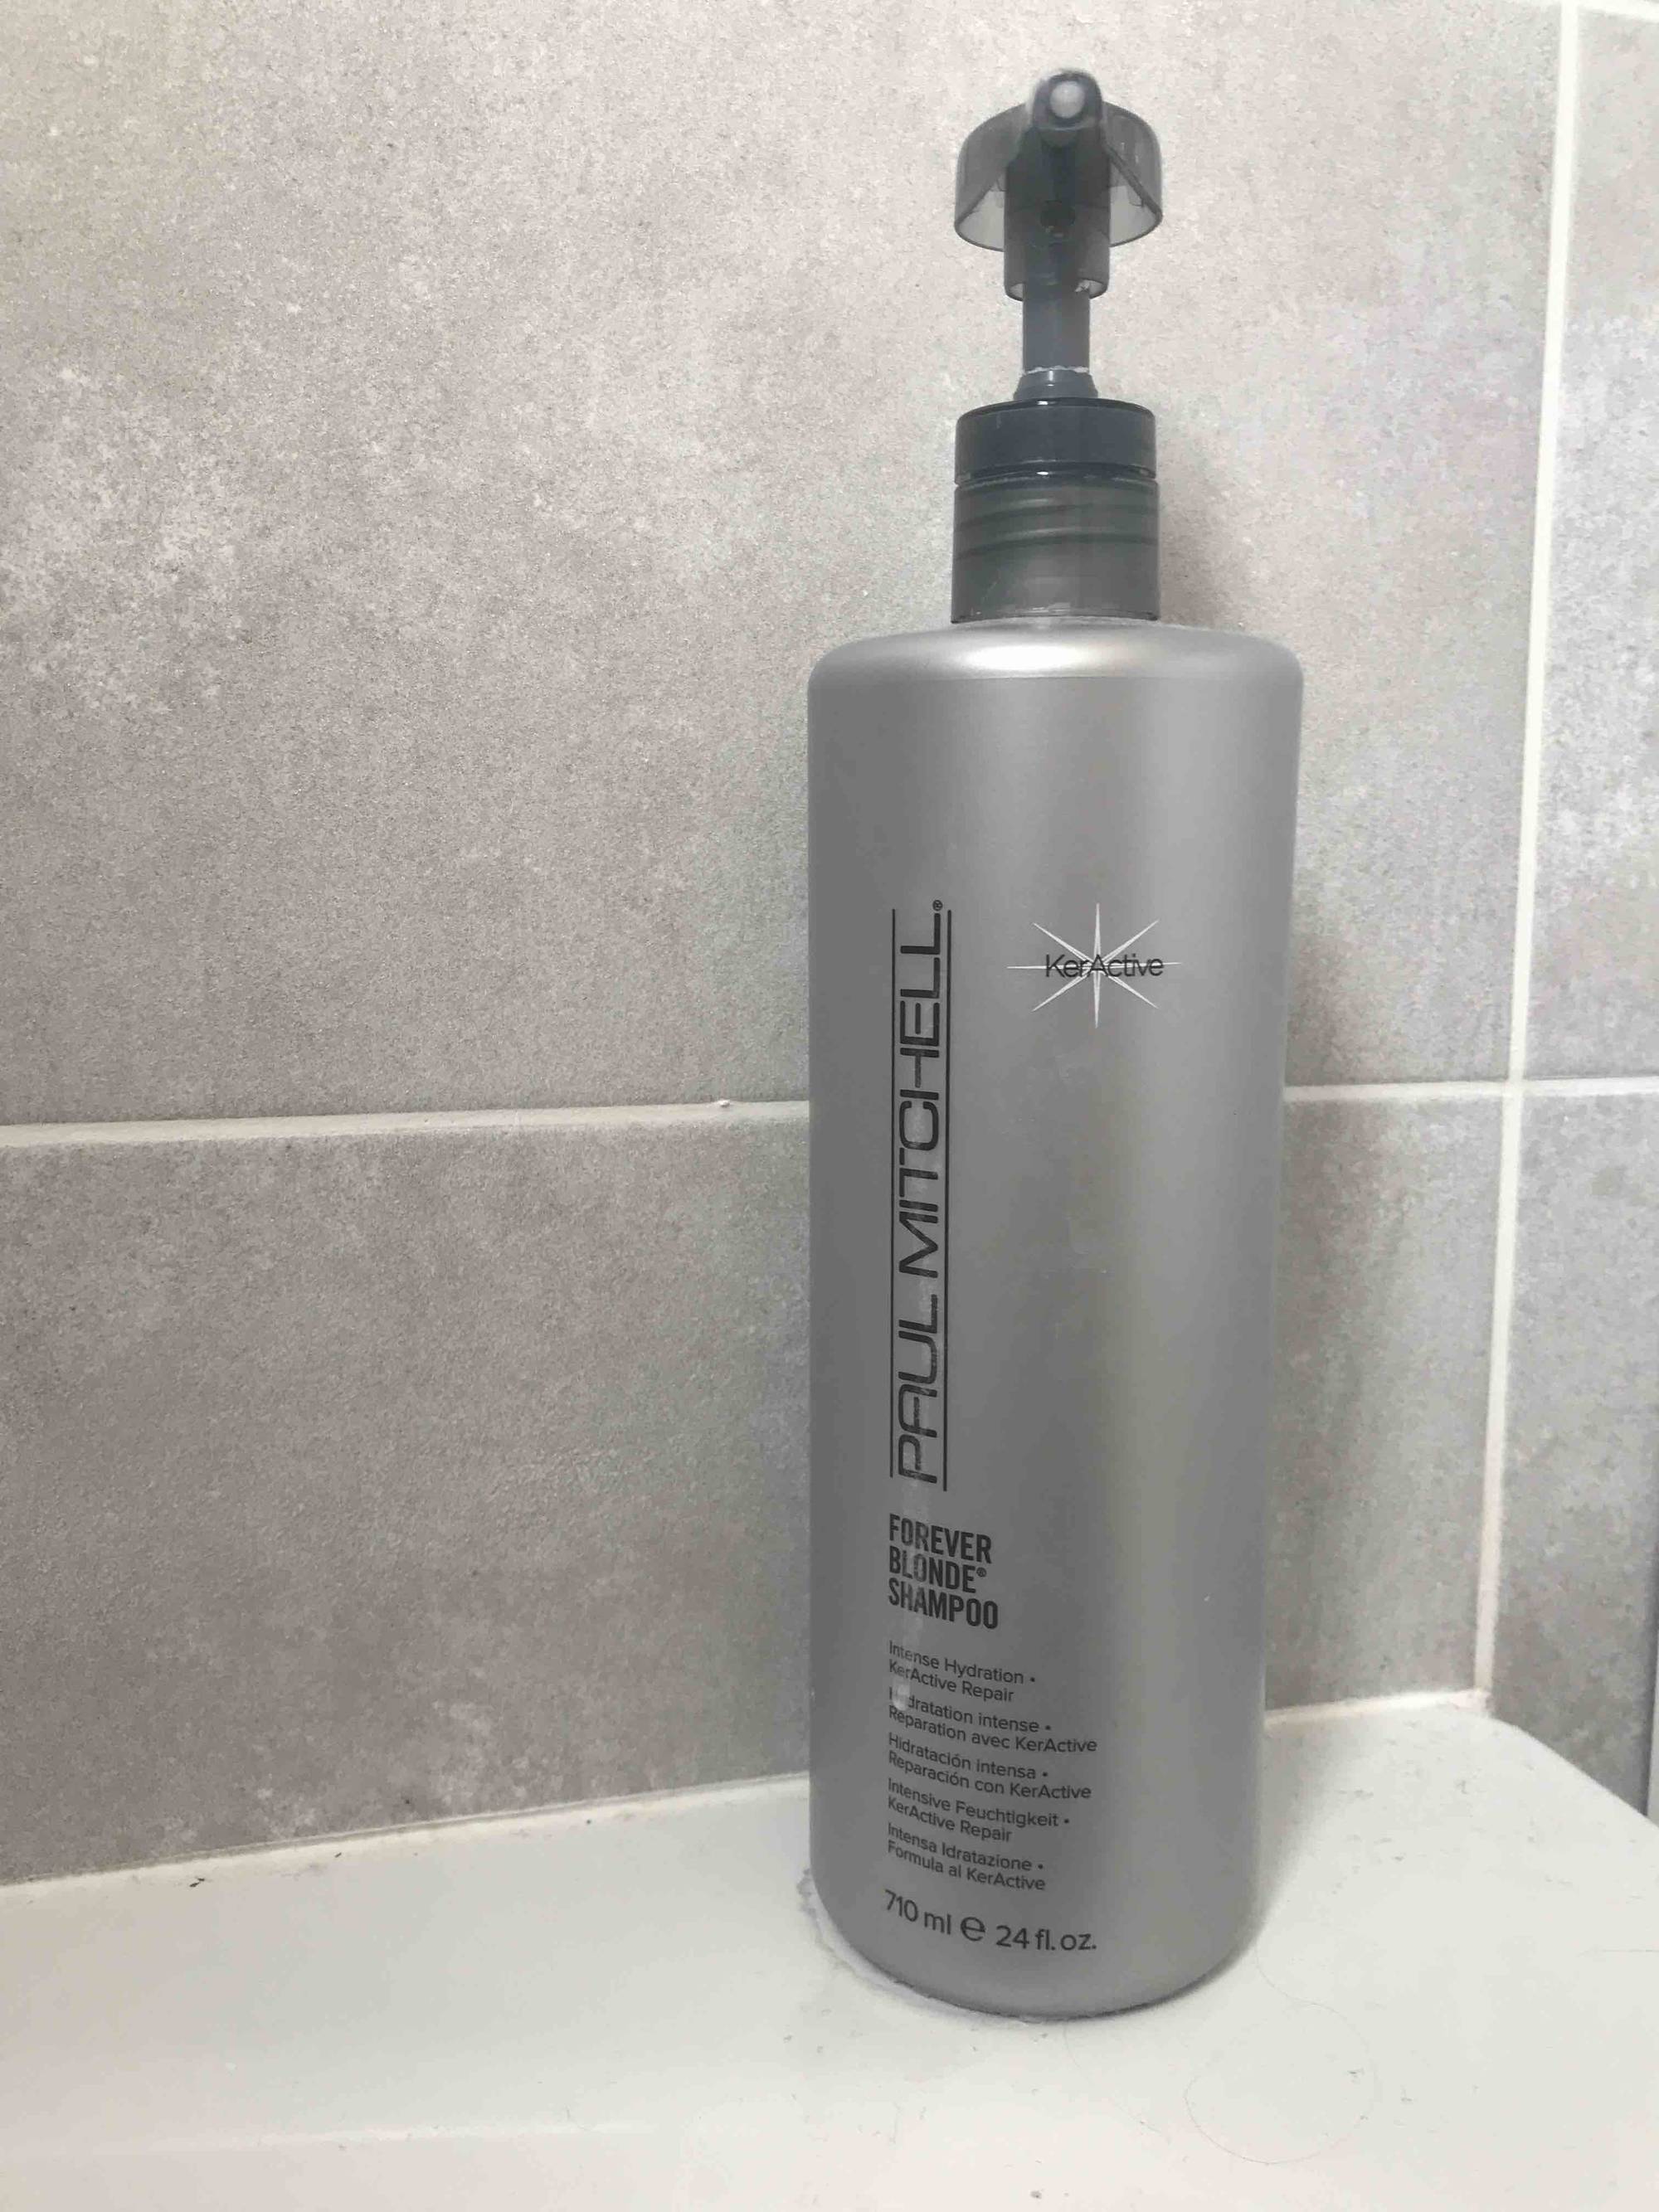 PAUL MITCHELL - Forever blonde shampoo